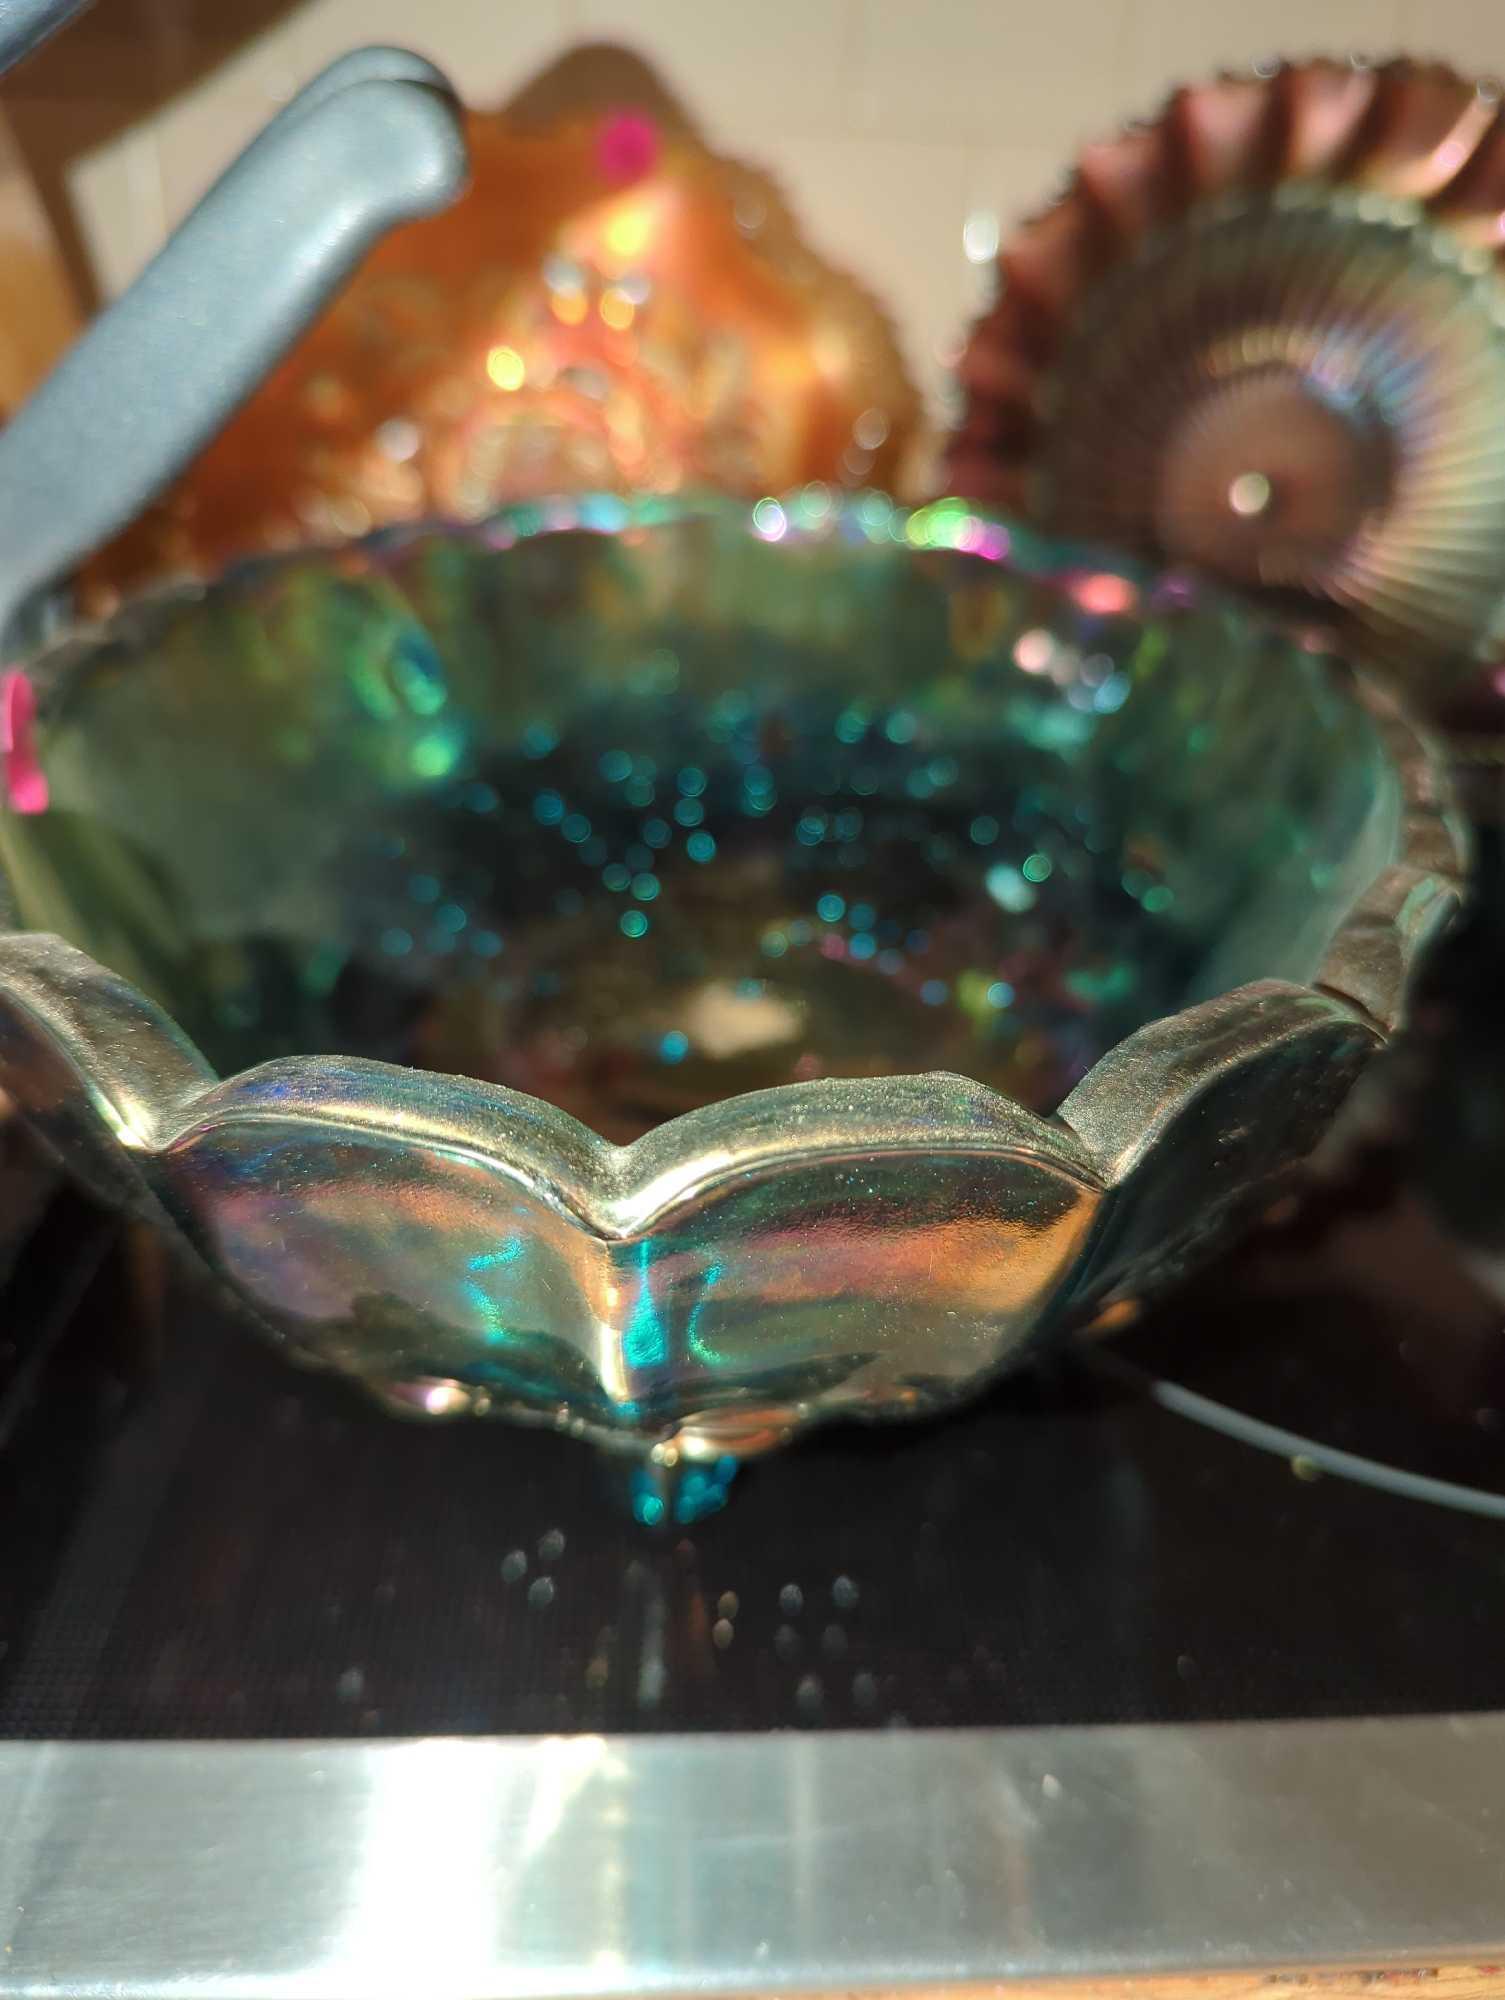 (KIT) IRIDESCENT BLUE CARNIVAL GLASS FRUIT BOWL, MEASURE APPROXIMATELY 12.5 IN X 4.5 IN X 8.5 IN,